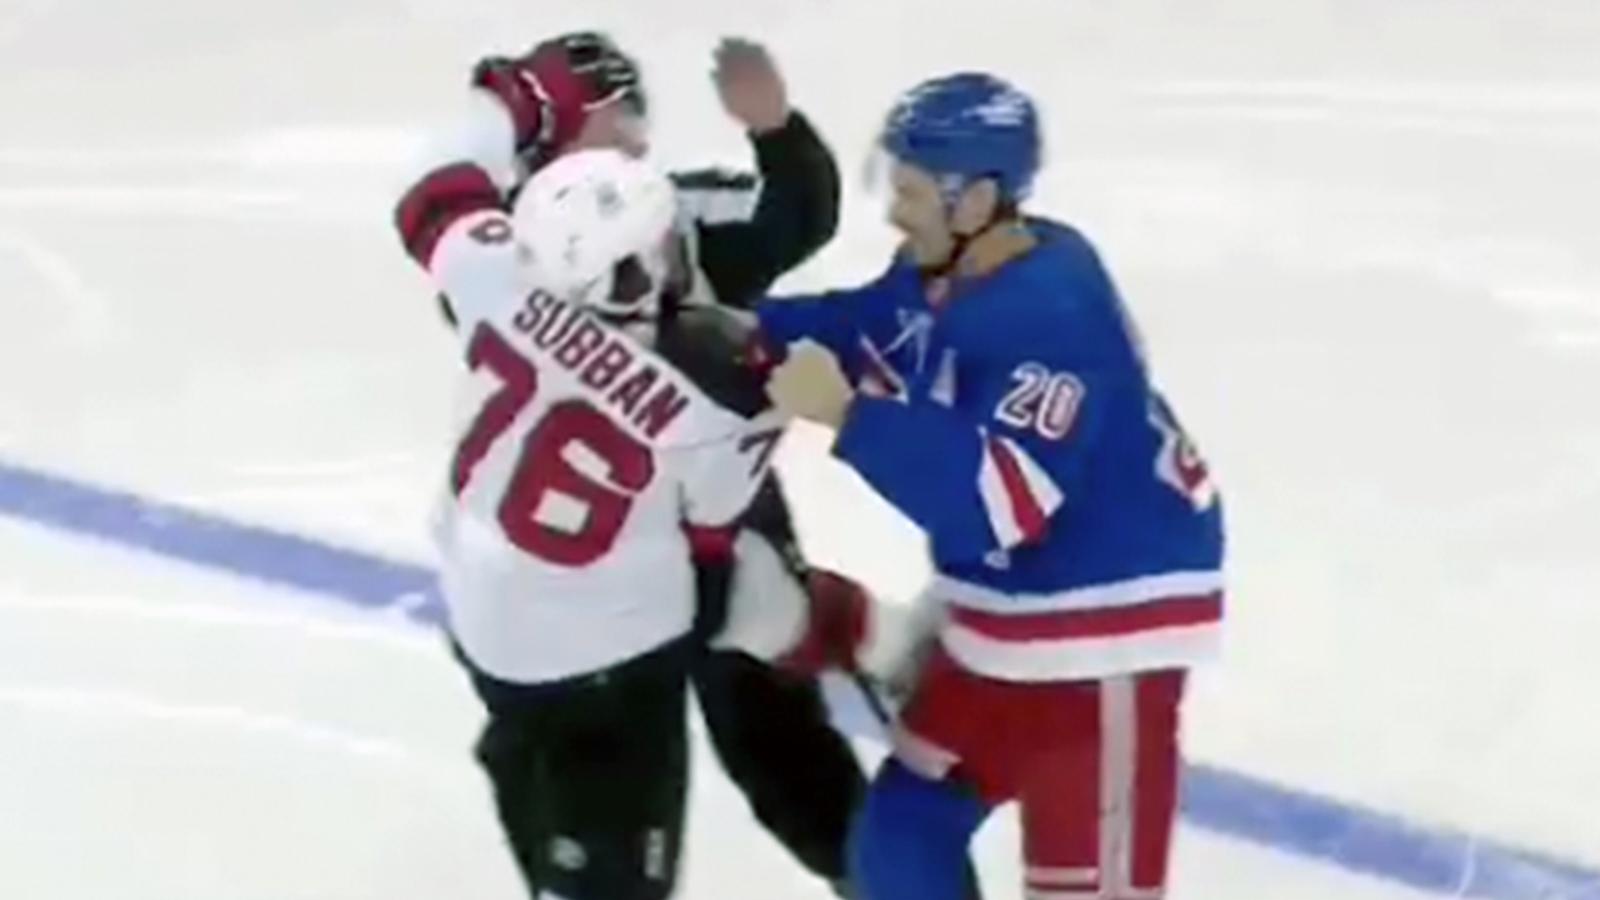 Kreider drops the gloves and absolutely rag dolls Subban, who refuses to fight